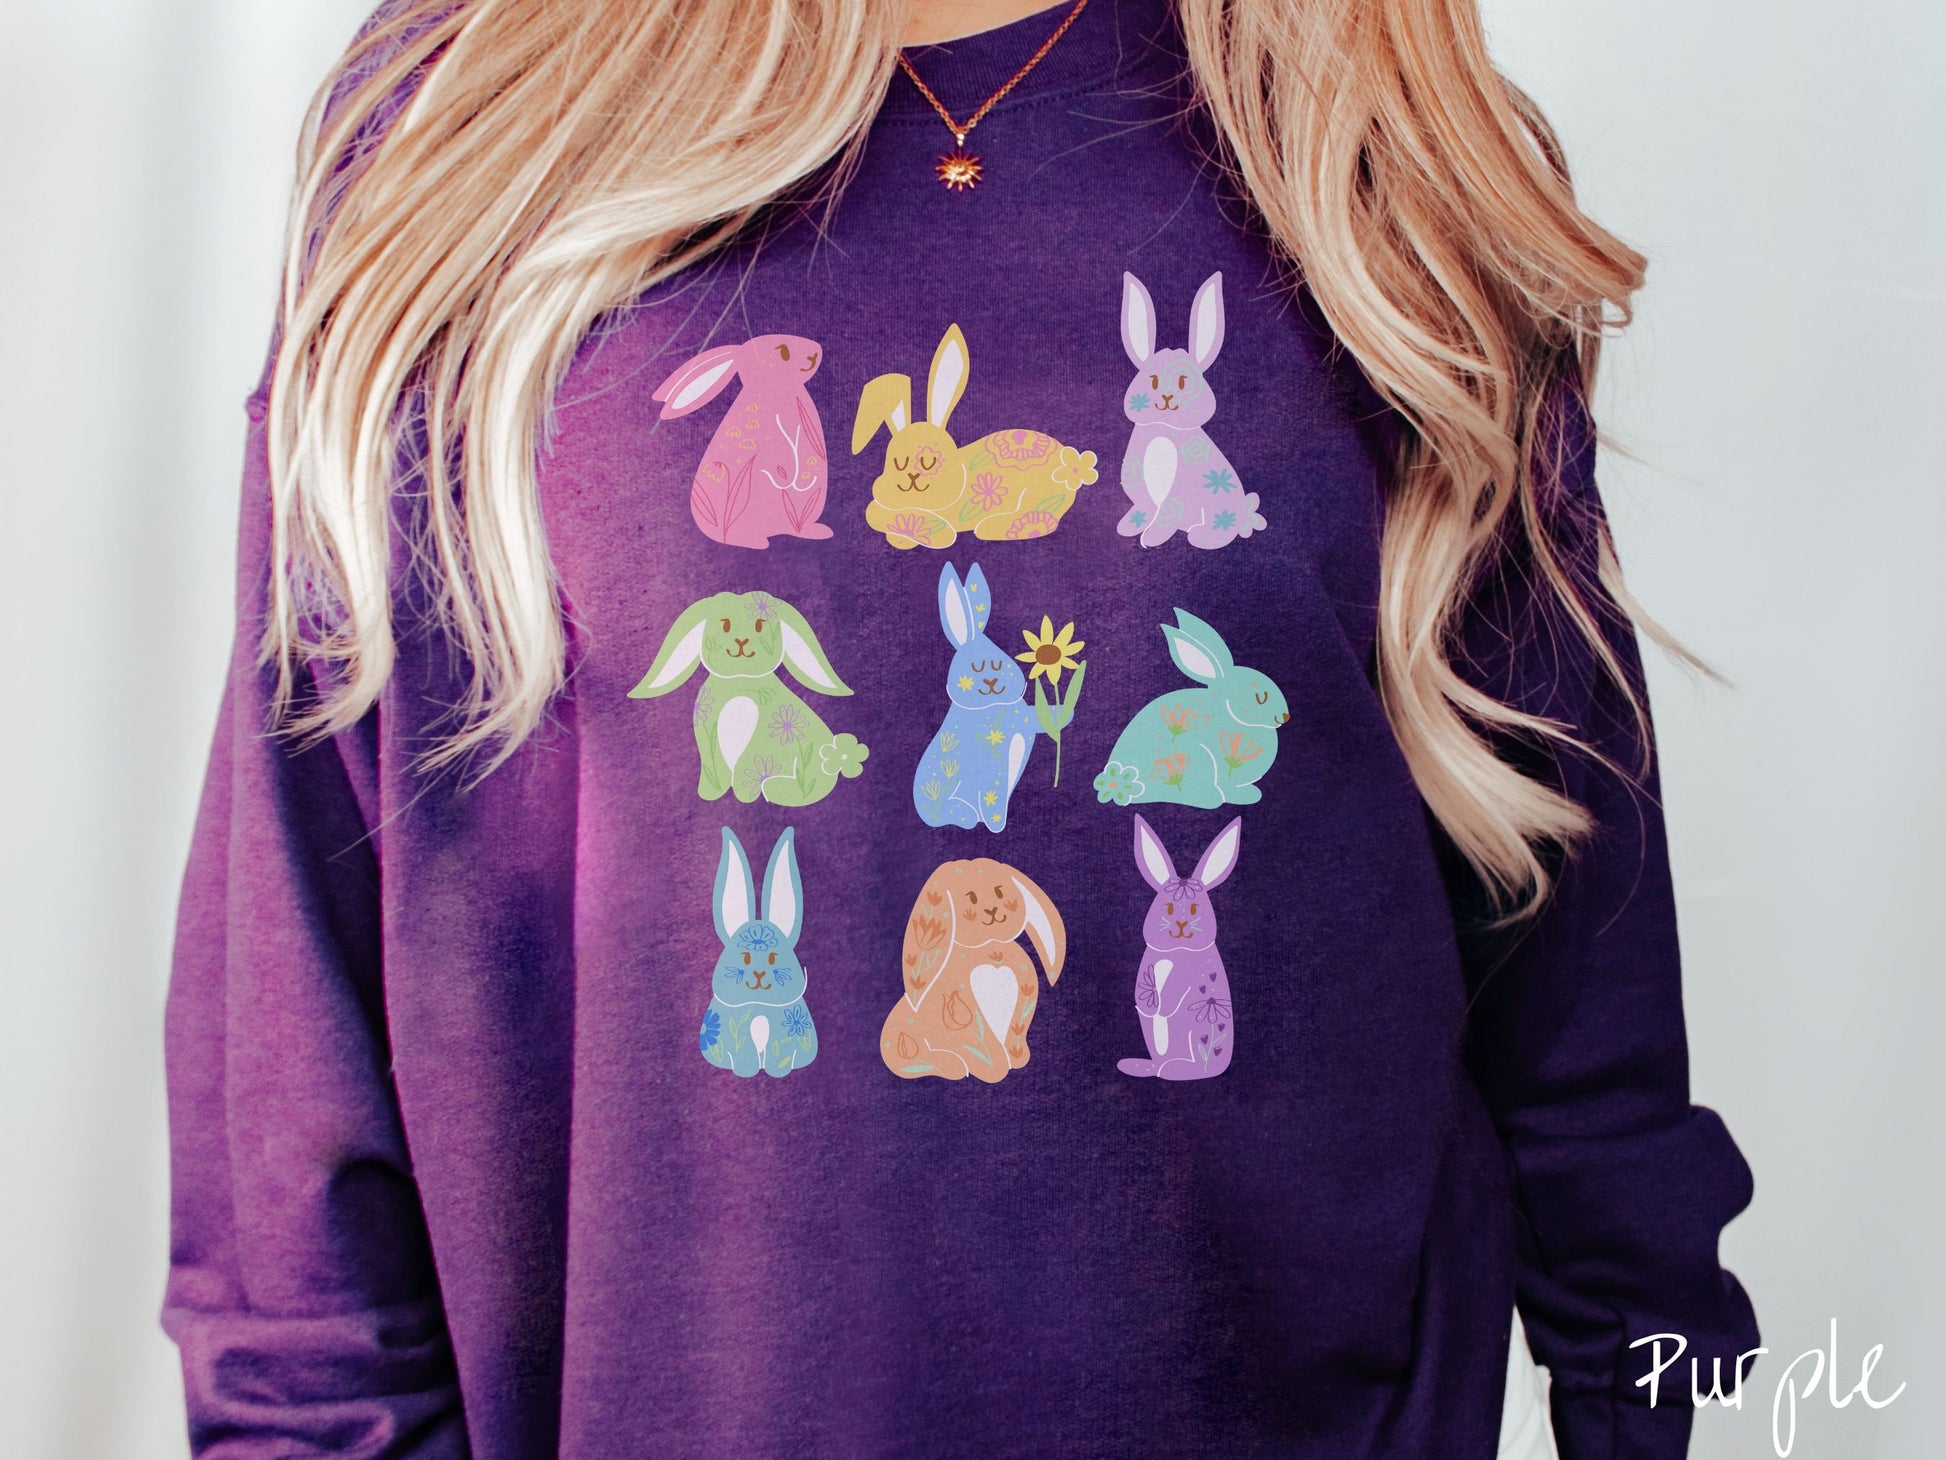 A woman wearing a cute, vintage purple colored sweatshirt with a three by three grid of colorful bunny rabbits. They are from left to right pink, yellow, purple, green, blue, seafoam, light blue, orange, and purple with flowers near them.